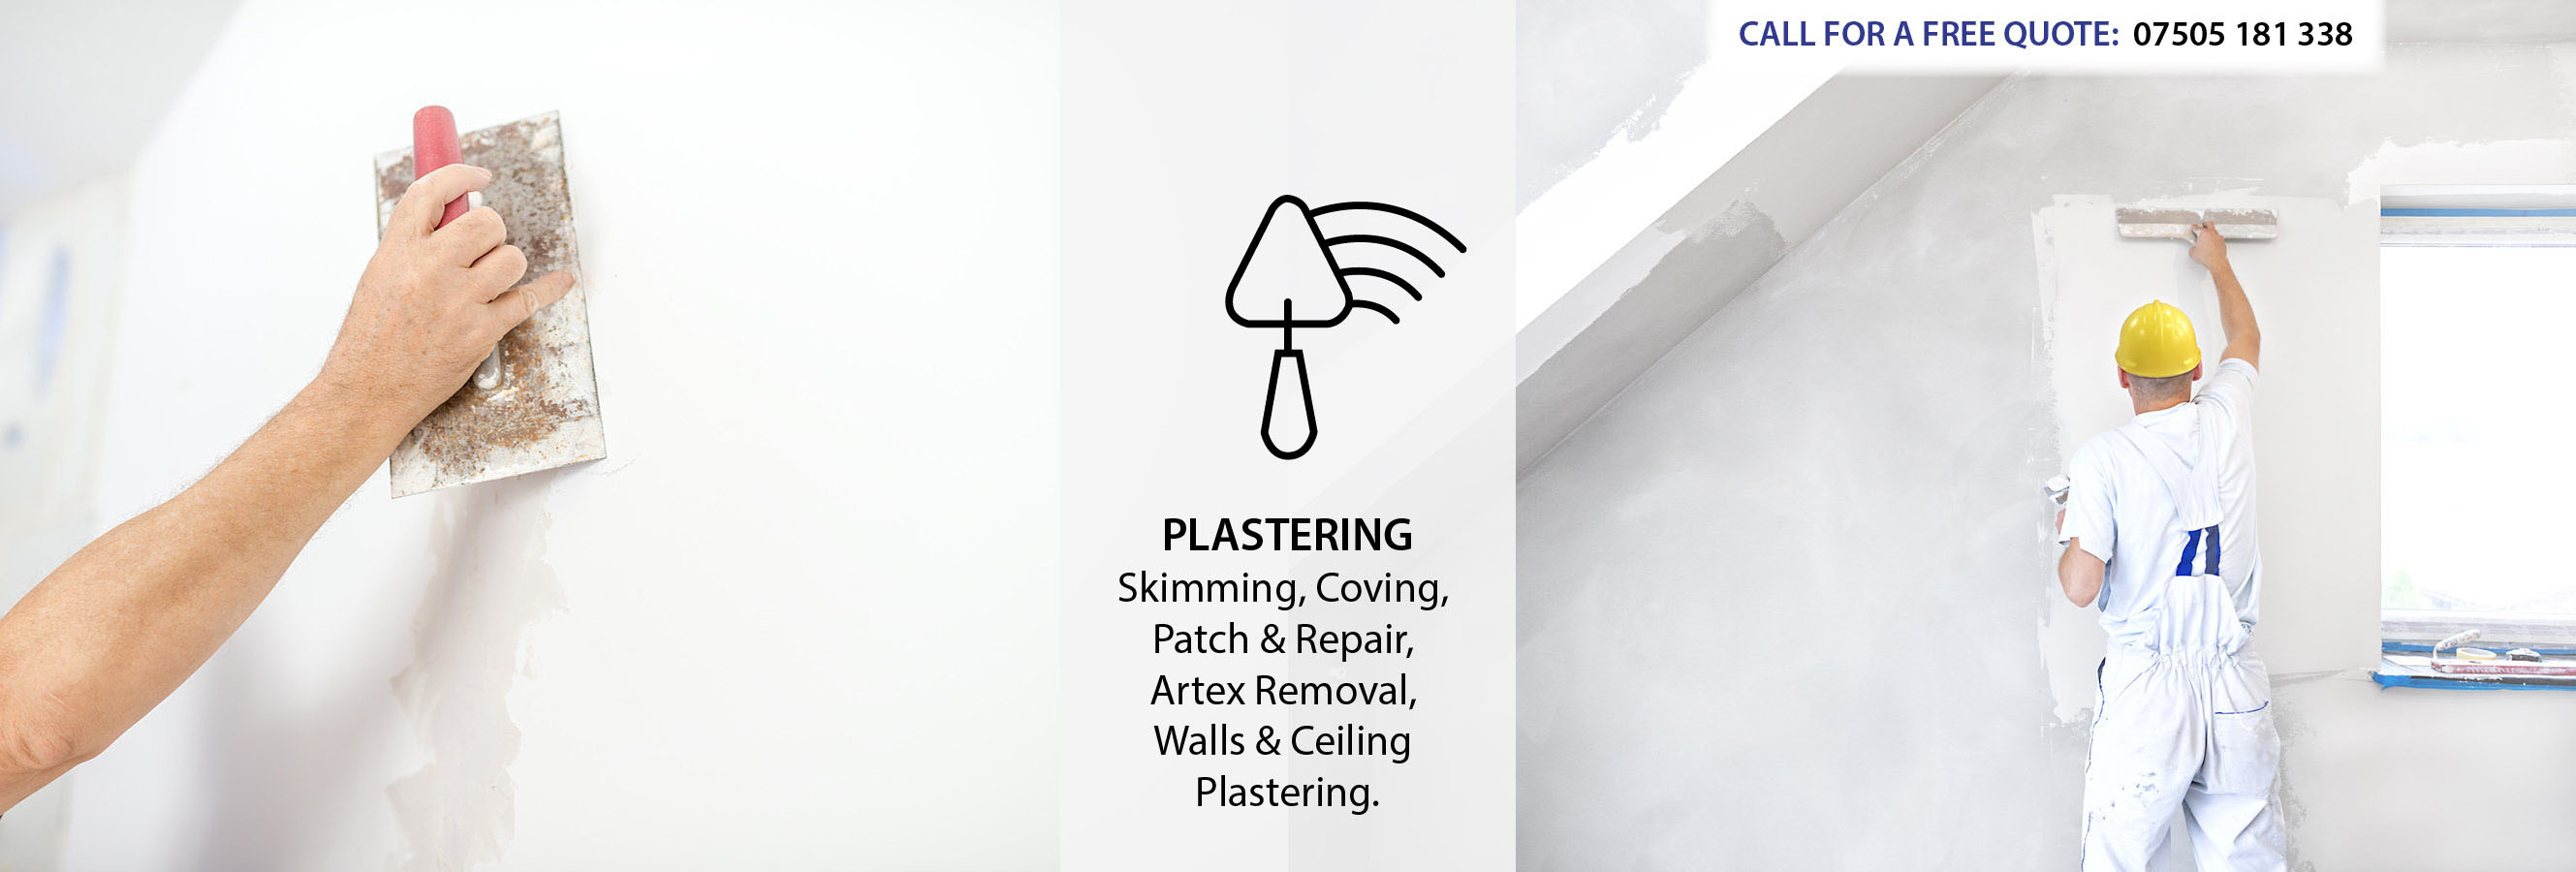 All Types of Plastering